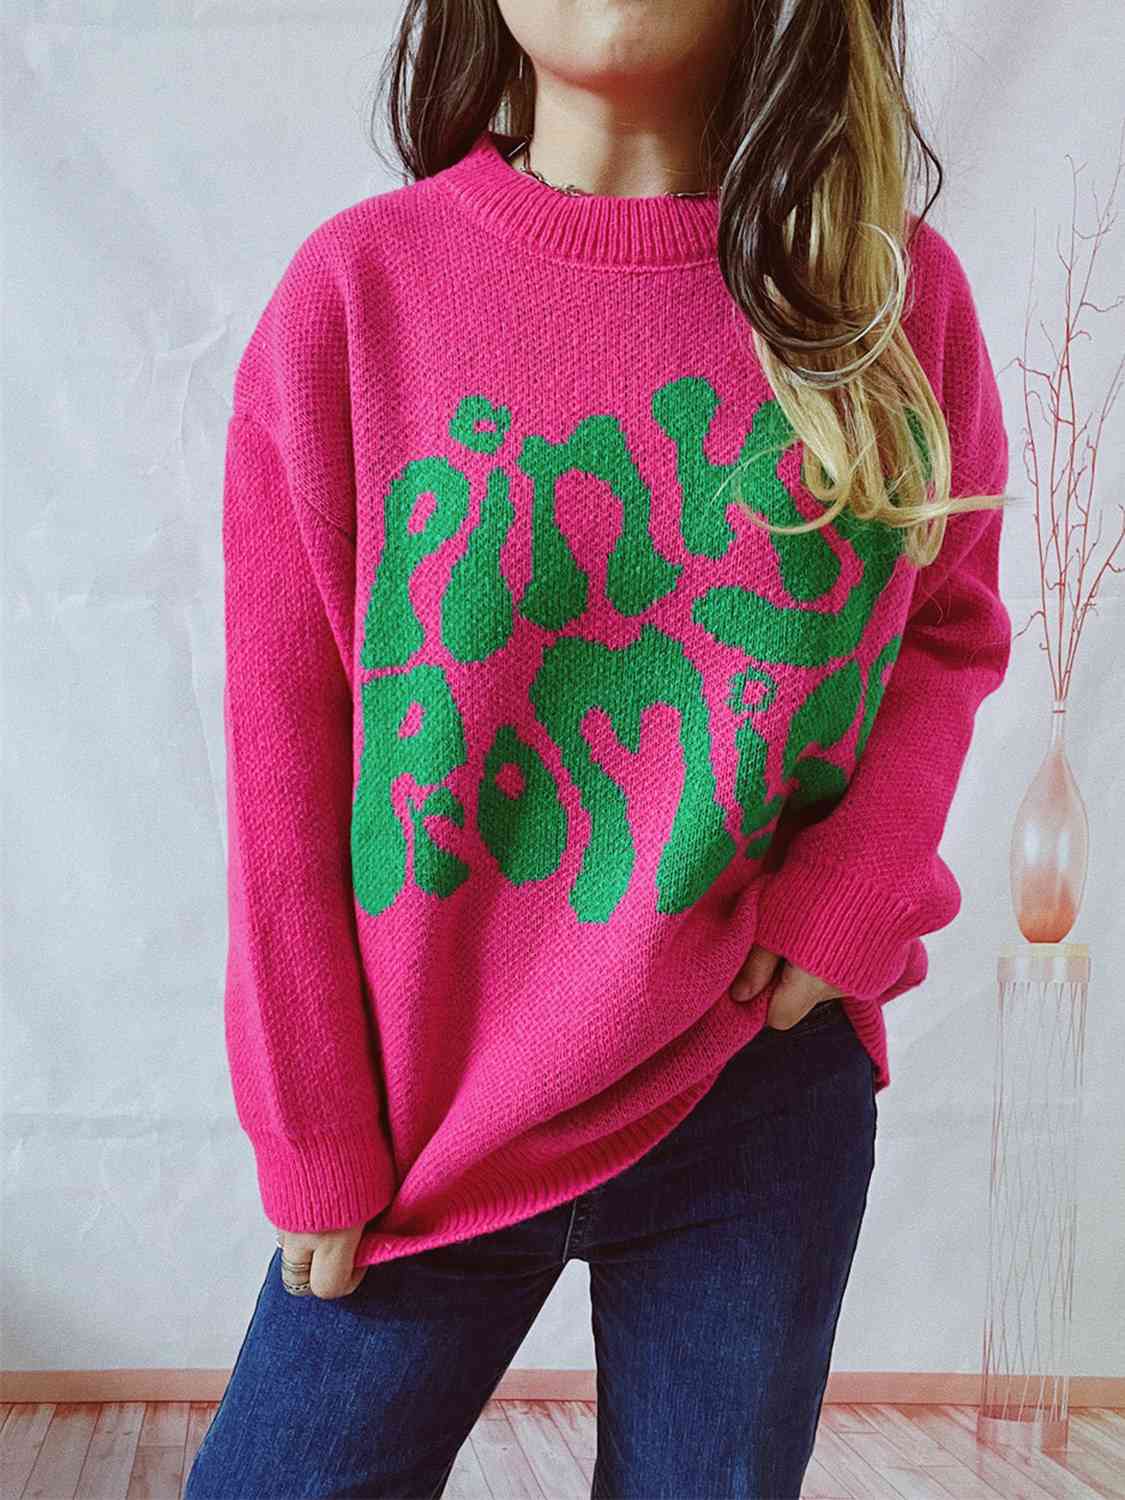 PINKY PROMISE Graphic Sweater - Deep Rose / S - Sweaters - Shirts & Tops - 1 - 2024